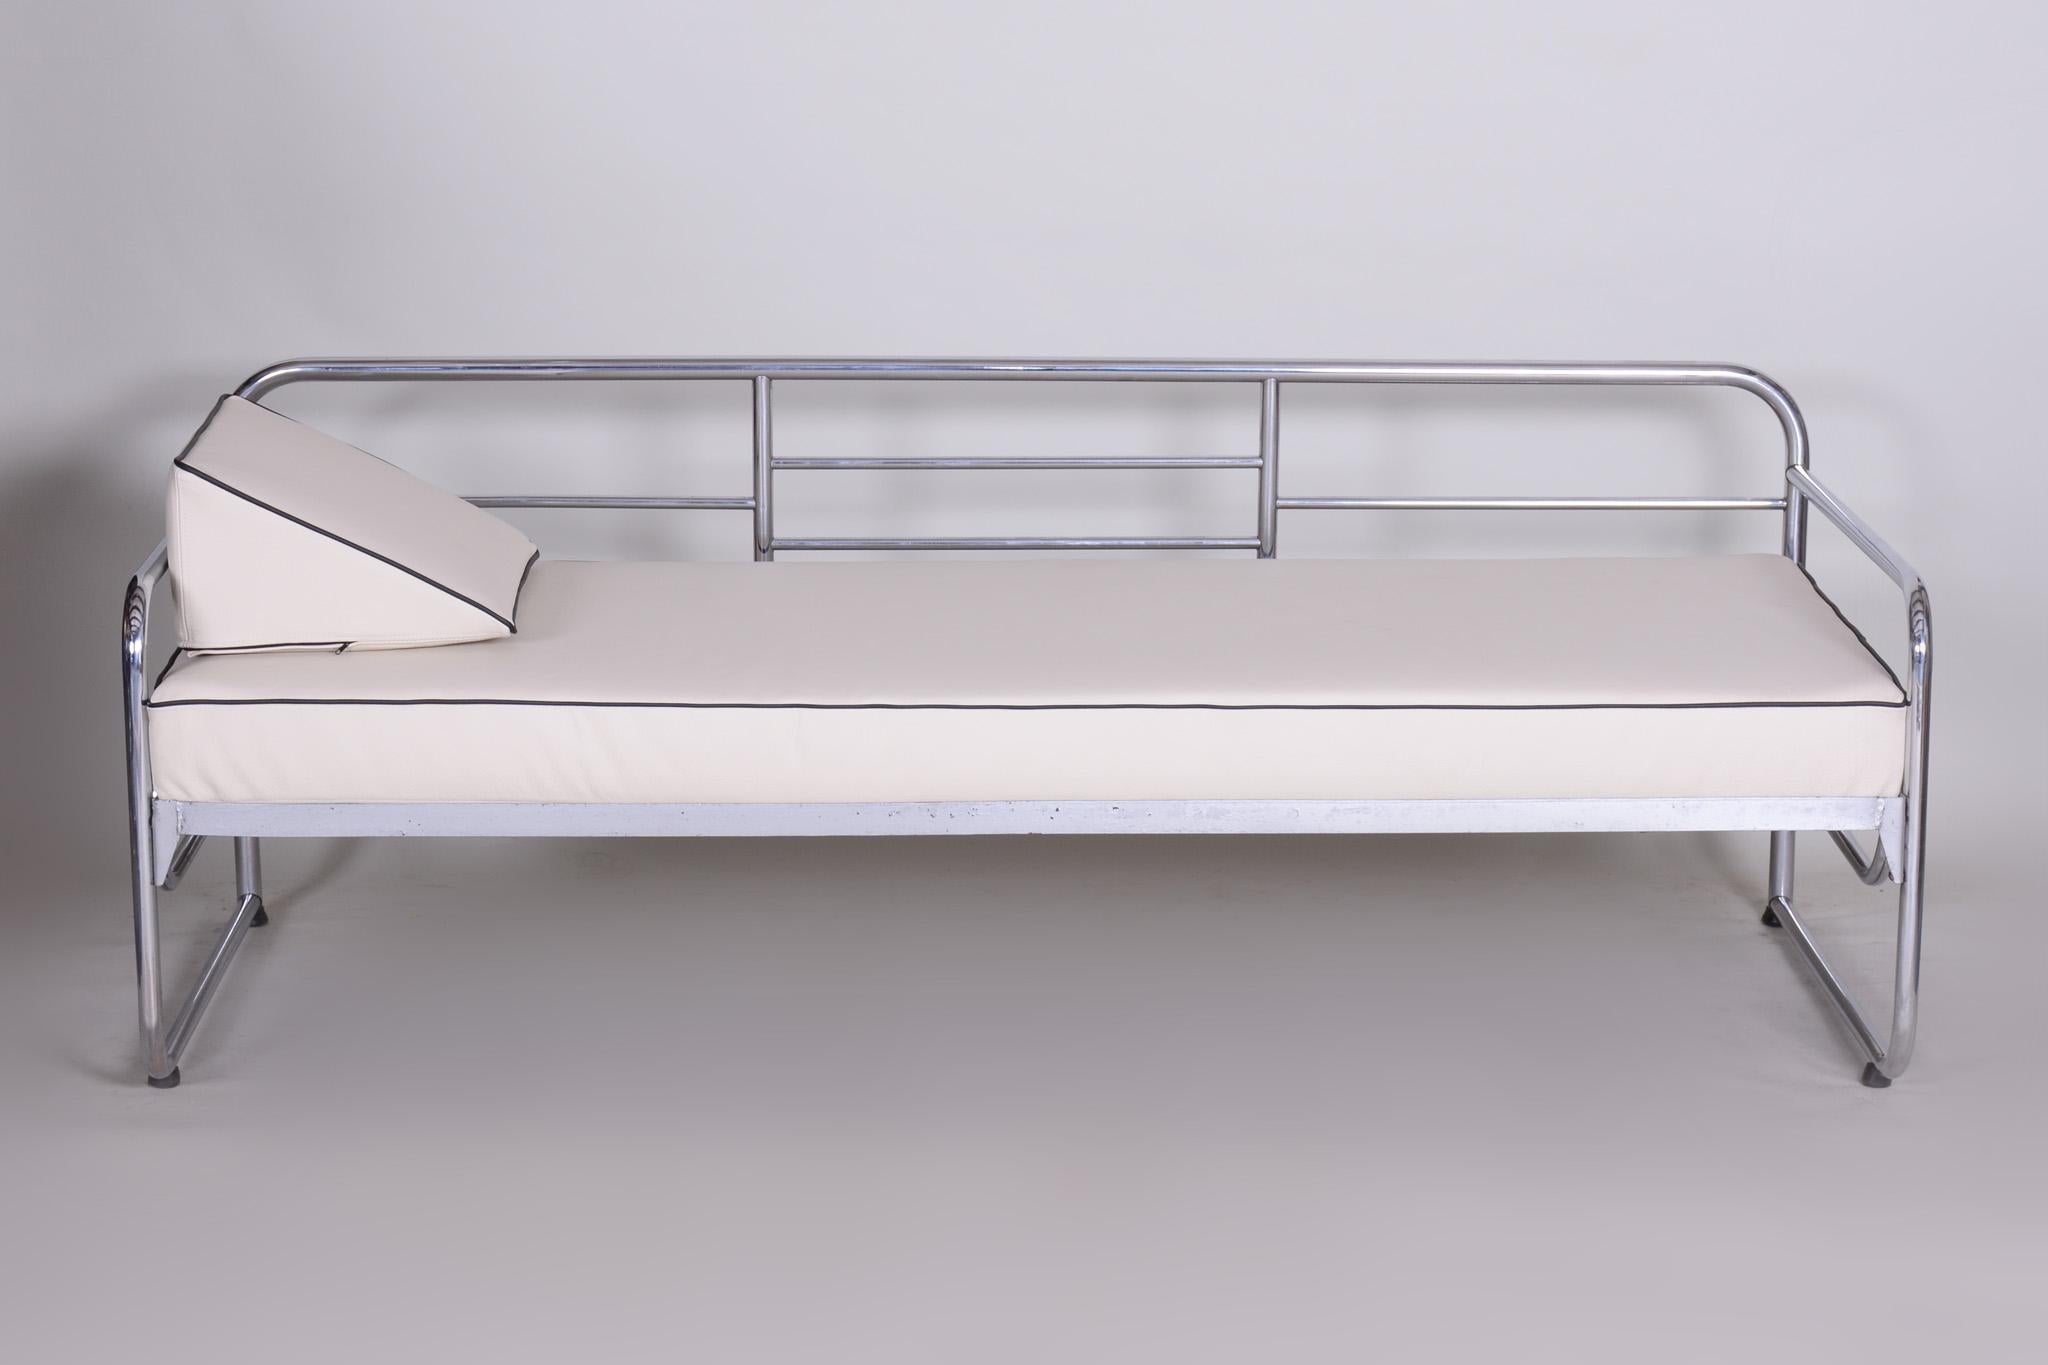 Bauhaus style sofa with a chrome tubular steel frame.
Manufactured by Mücke-Melder in the 1930s.
Chrome tubular steel is in perfect original condition.
Newlly upholstered to high quality Ivory leather.
Source: Czechoslovakia.